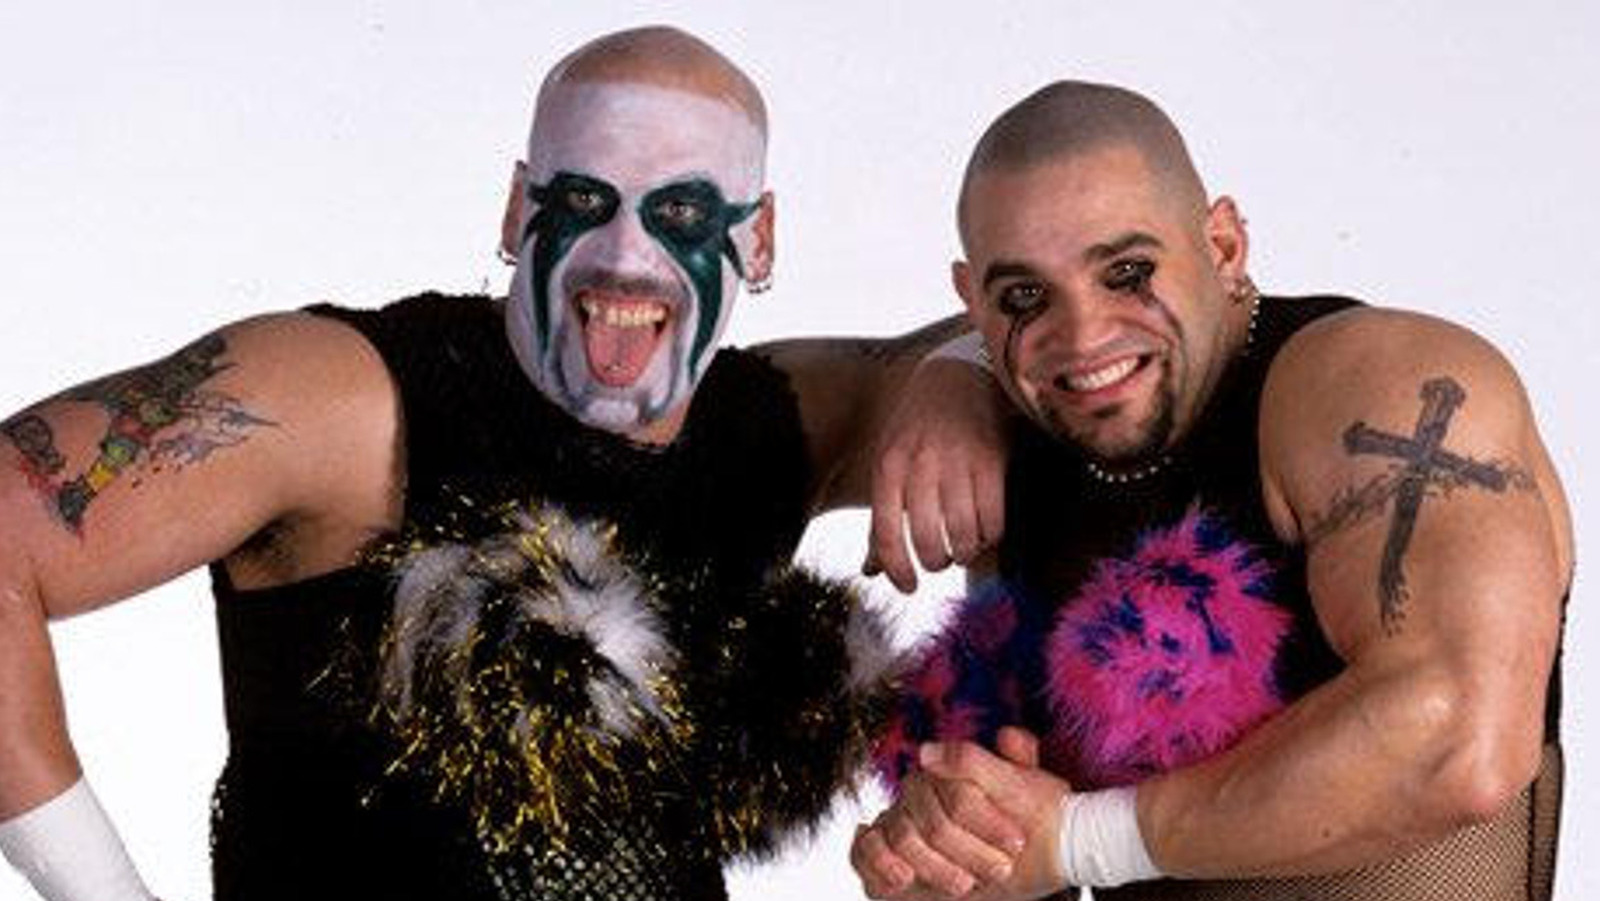 The Headbangers Provide An Update On Possible WWE Return After Signing Legends Contracts